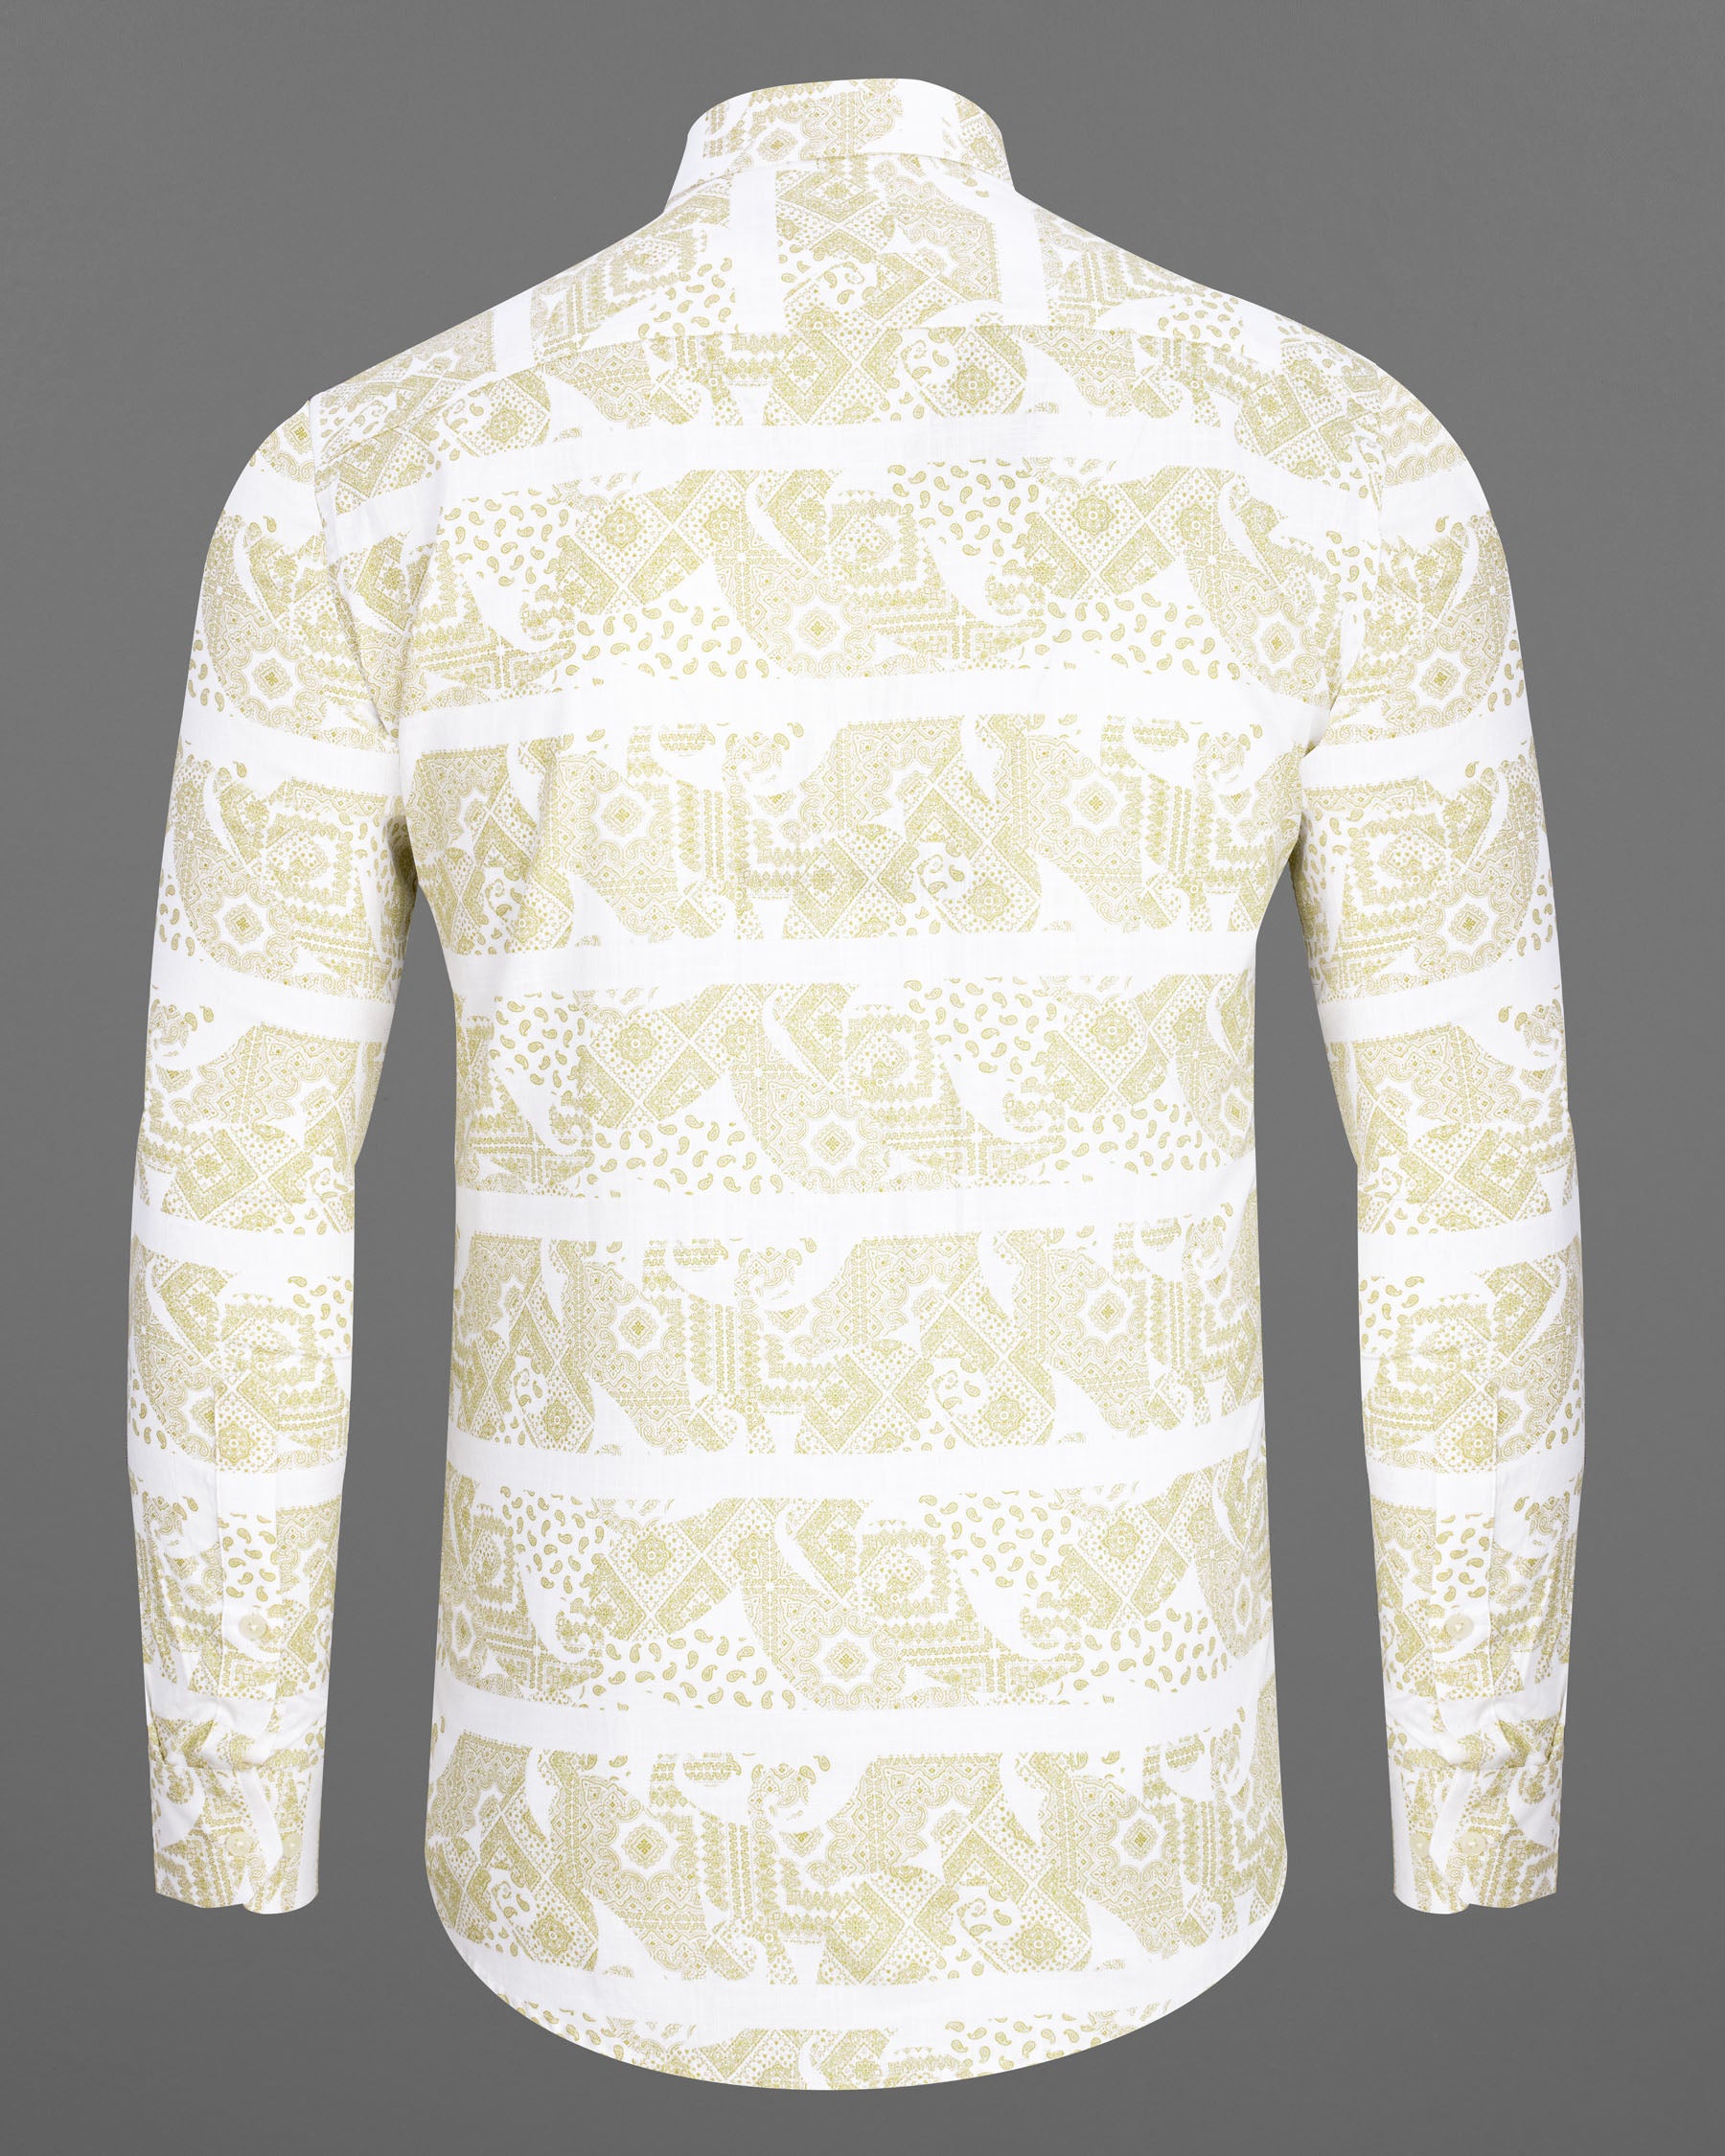 Bright White with Ancient art In spired Print Luxurious Linen Shirt 6948-BD-38,6948-BD-38,6948-BD-39,6948-BD-39,6948-BD-40,6948-BD-40,6948-BD-42,6948-BD-42,6948-BD-44,6948-BD-44,6948-BD-46,6948-BD-46,6948-BD-48,6948-BD-48,6948-BD-50,6948-BD-50,6948-BD-52,6948-BD-52